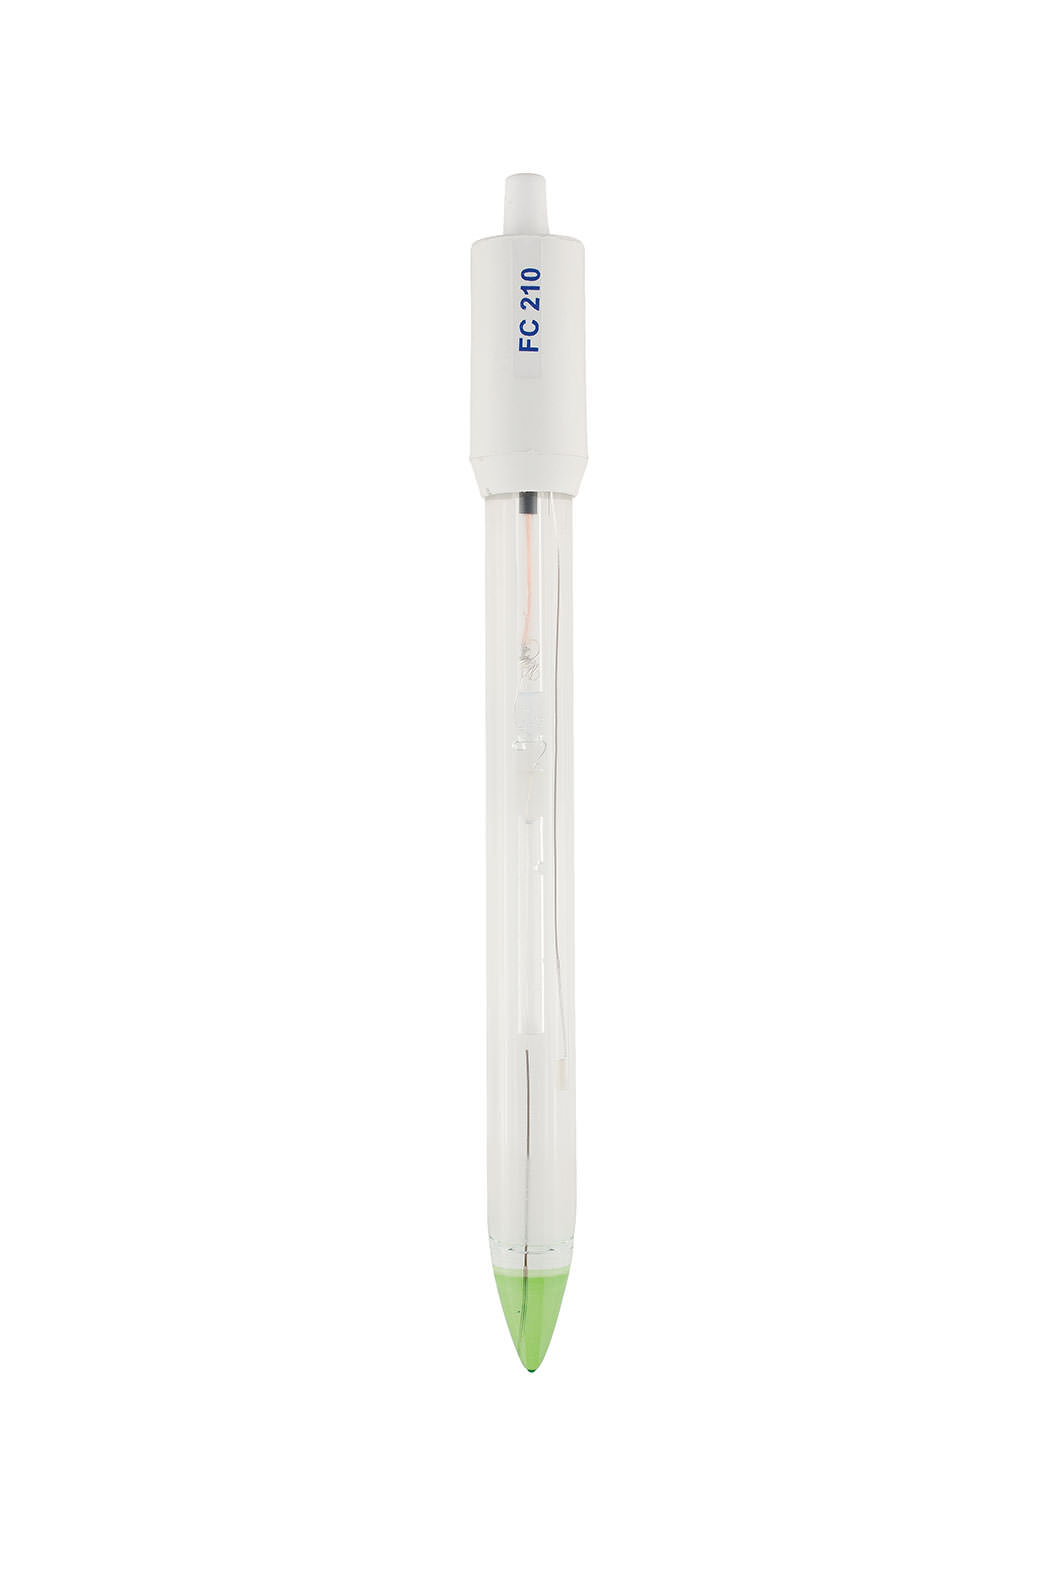 FC210B Foodcare pH Electrode for Milk